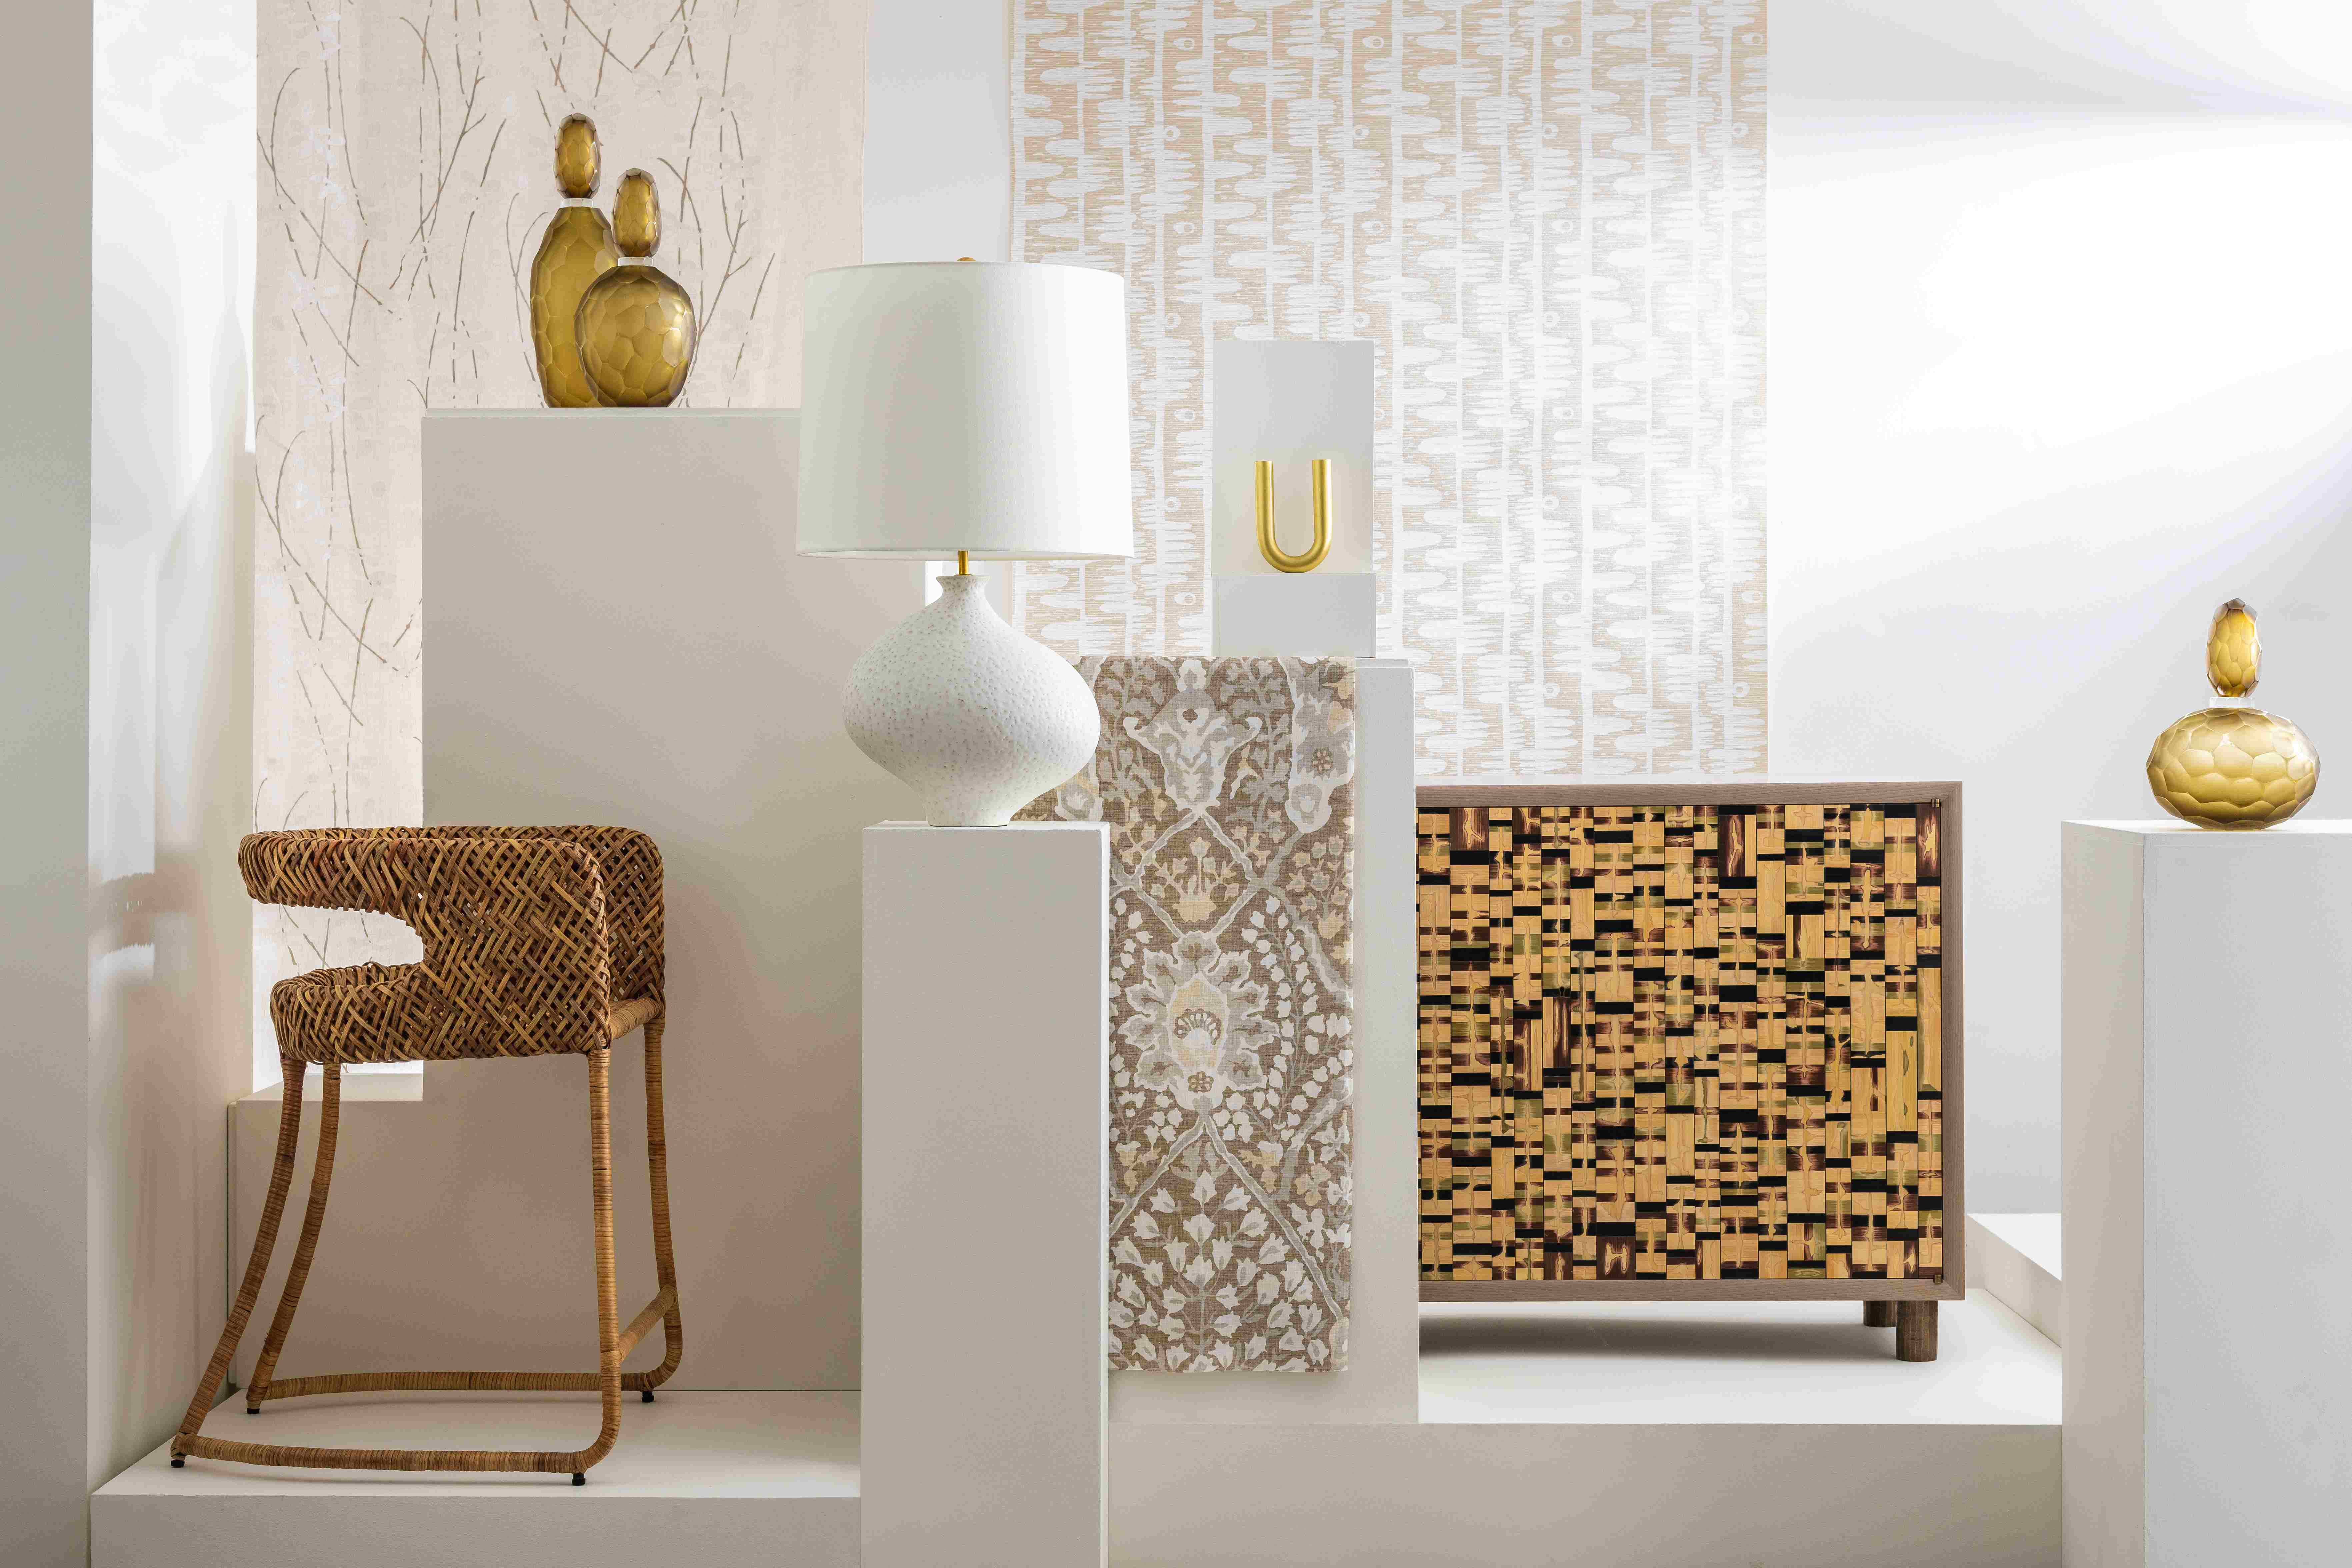 ‘Zen Luxe’ is a ‘layered look that makes home feel like a sanctuary'